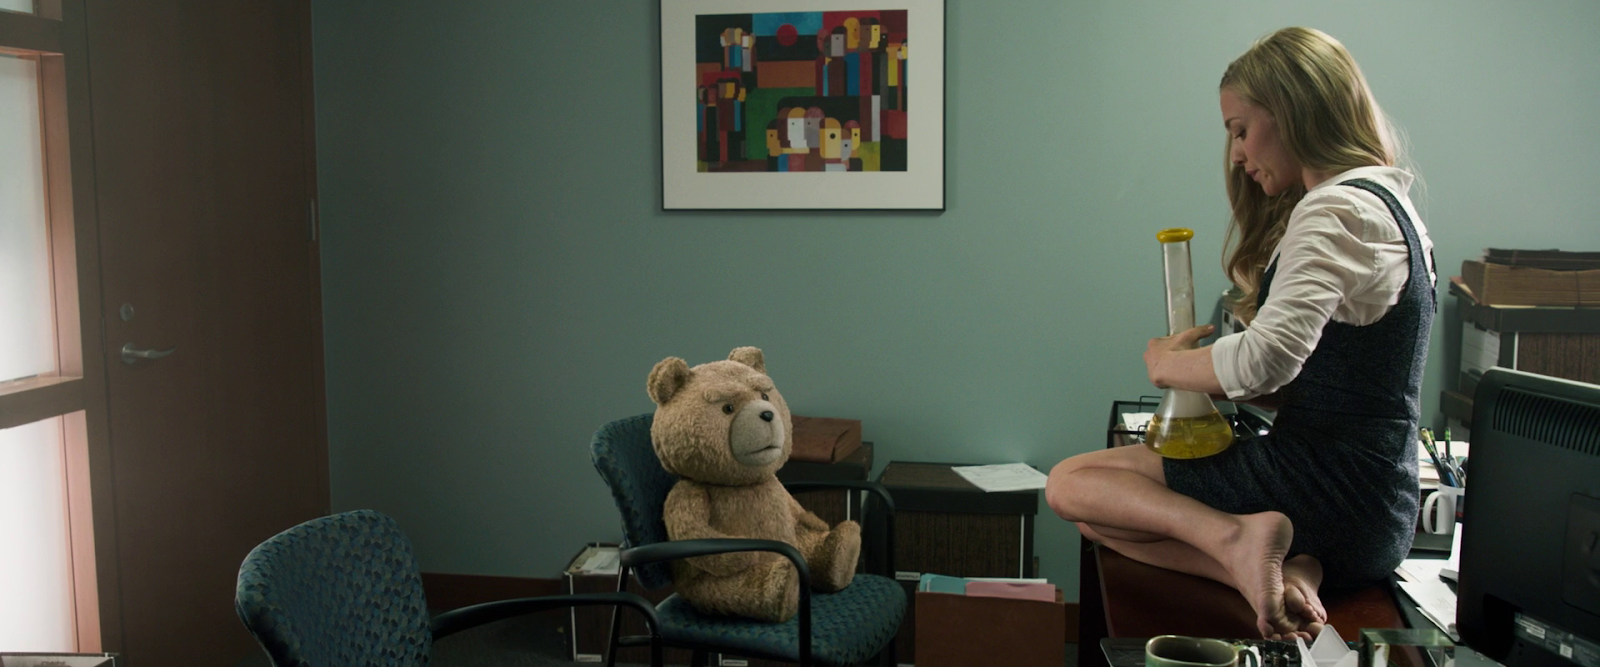  Ted 2 (2015) UNRATED BDRip 1080p Latino